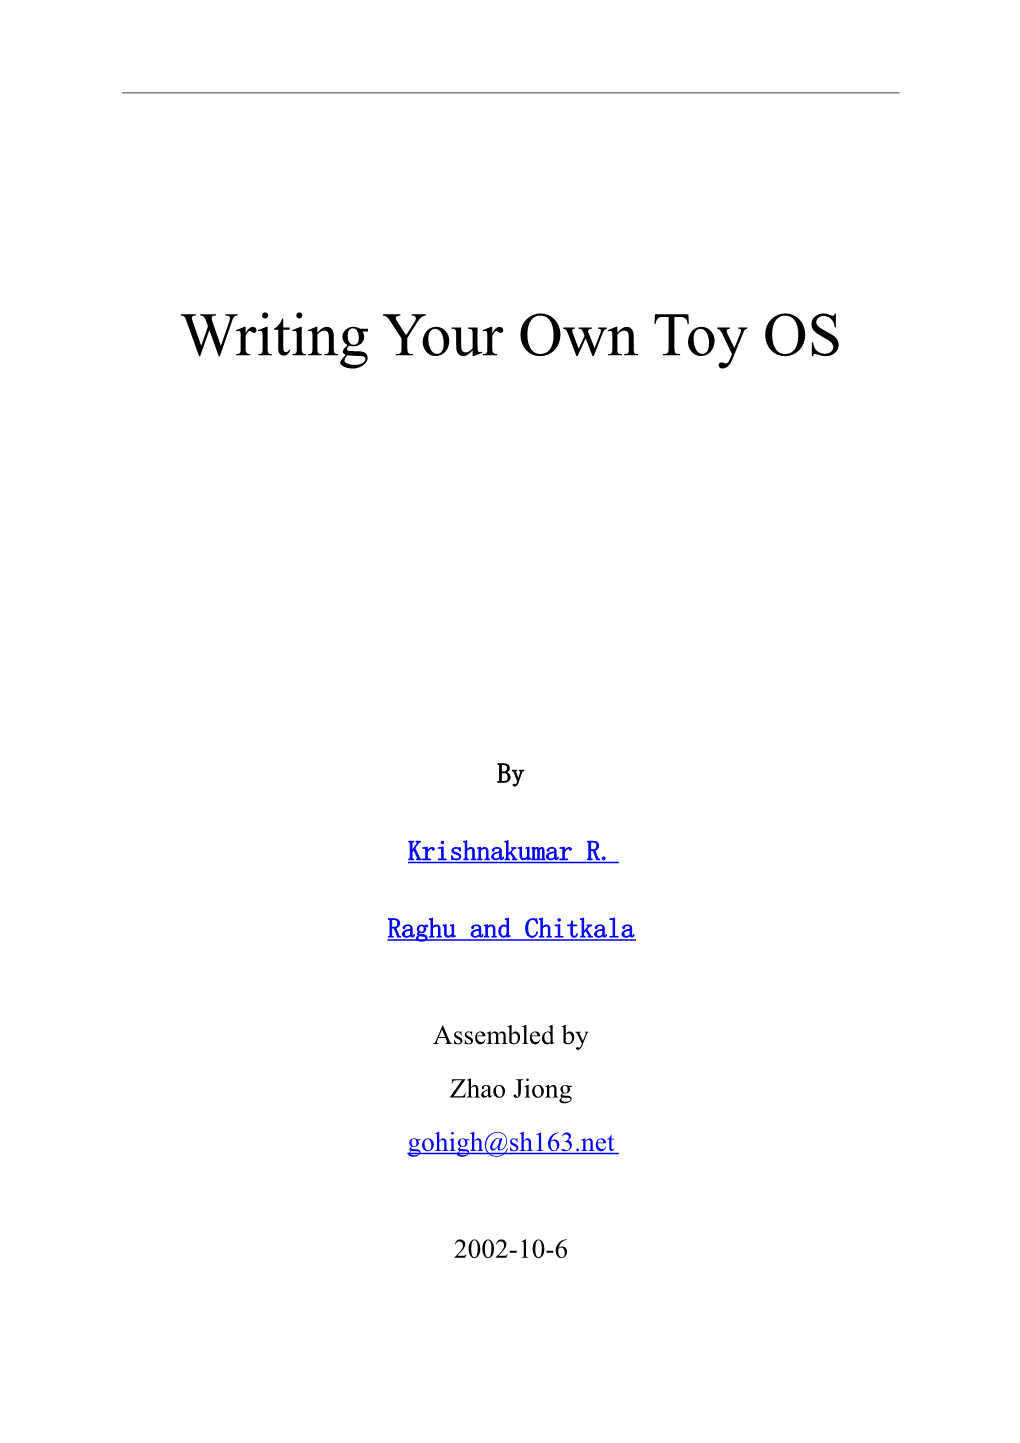 Writing Your Own Toy OS